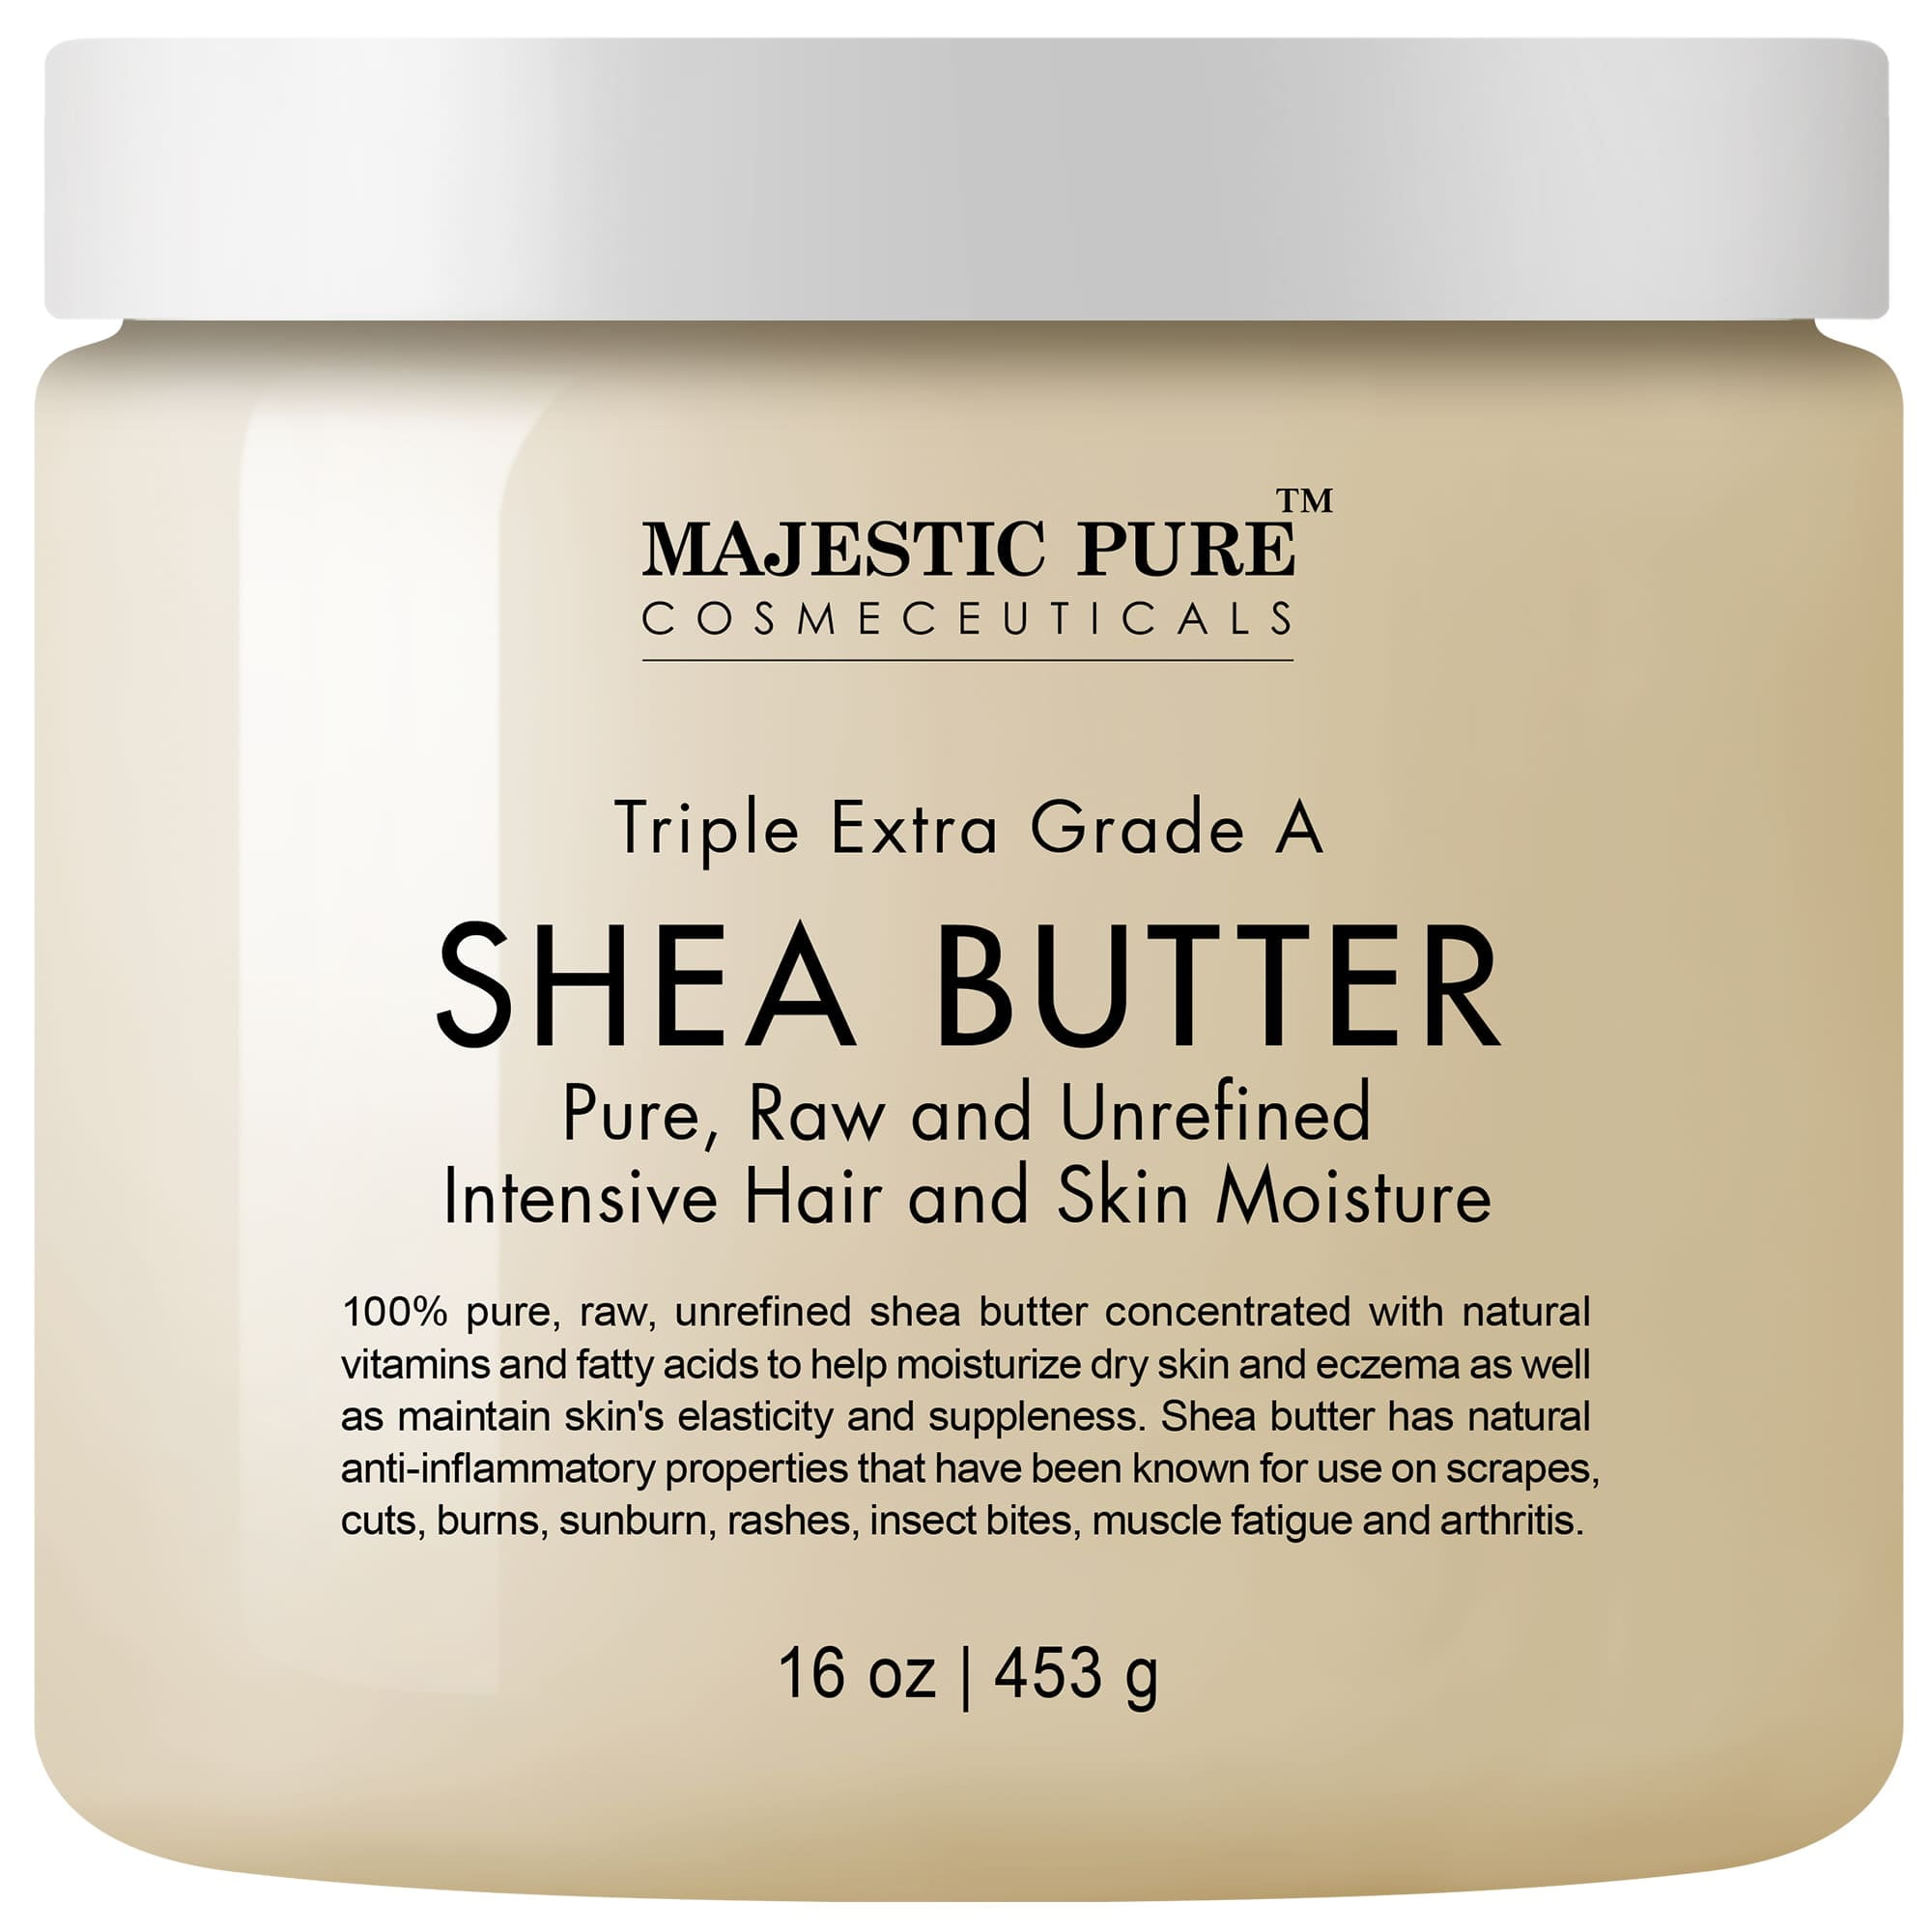  Better Shea Butter Set of Raw Shea Butter, Raw Mango Butter,  Unrefined Cocoa Butter For Soap Making and DIY Body Butters, Lip Balms,  Body Lotions - Each Jar is 4 oz